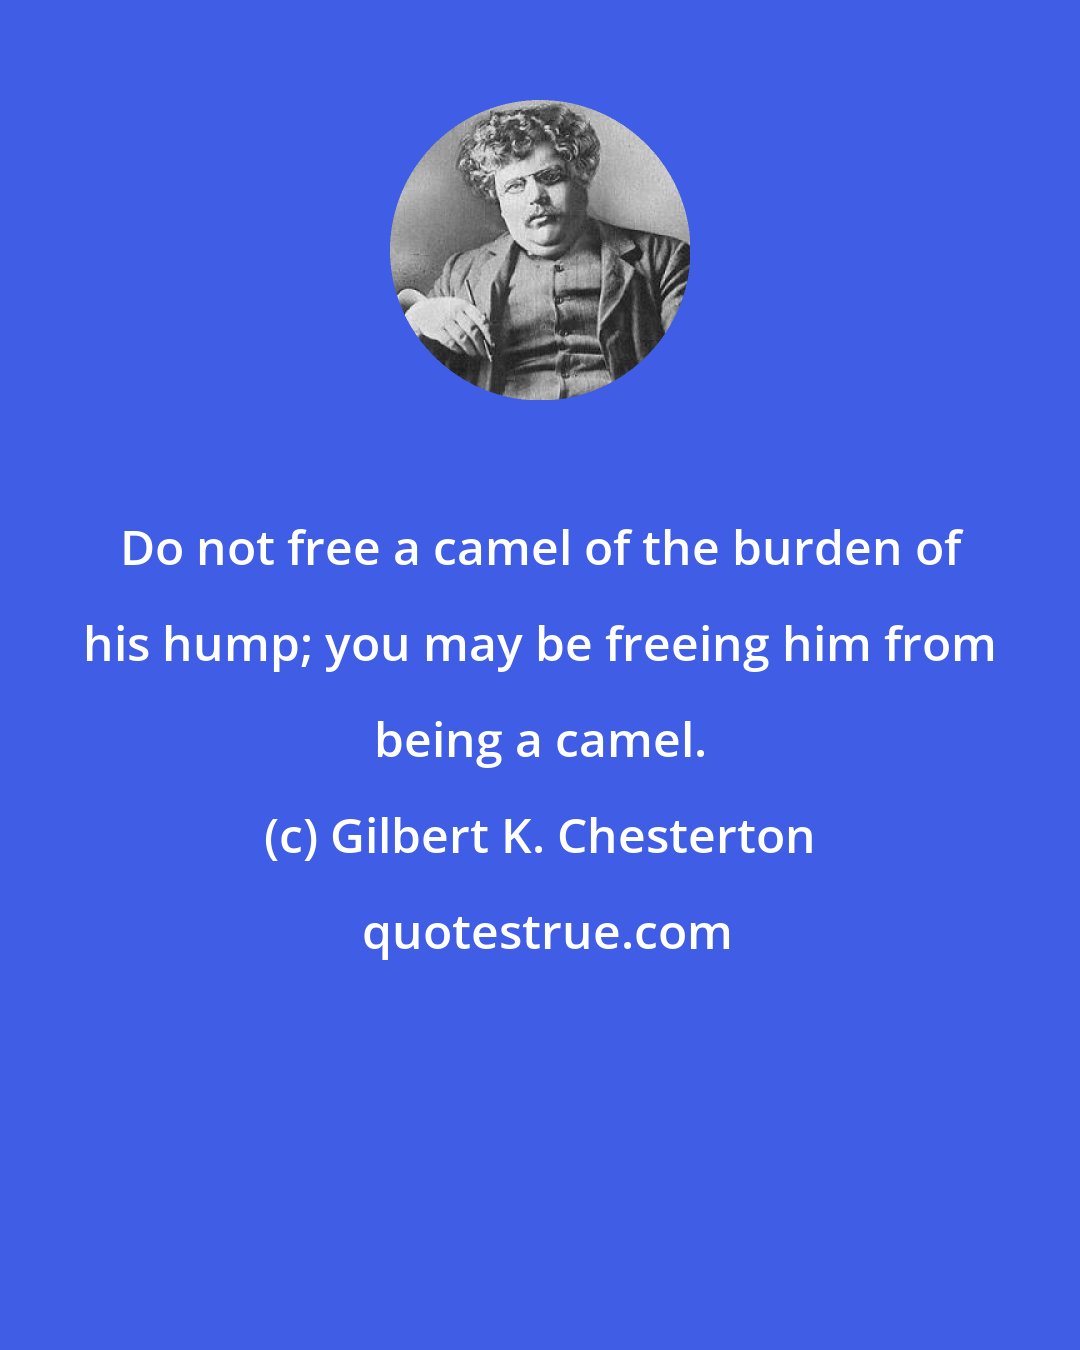 Gilbert K. Chesterton: Do not free a camel of the burden of his hump; you may be freeing him from being a camel.